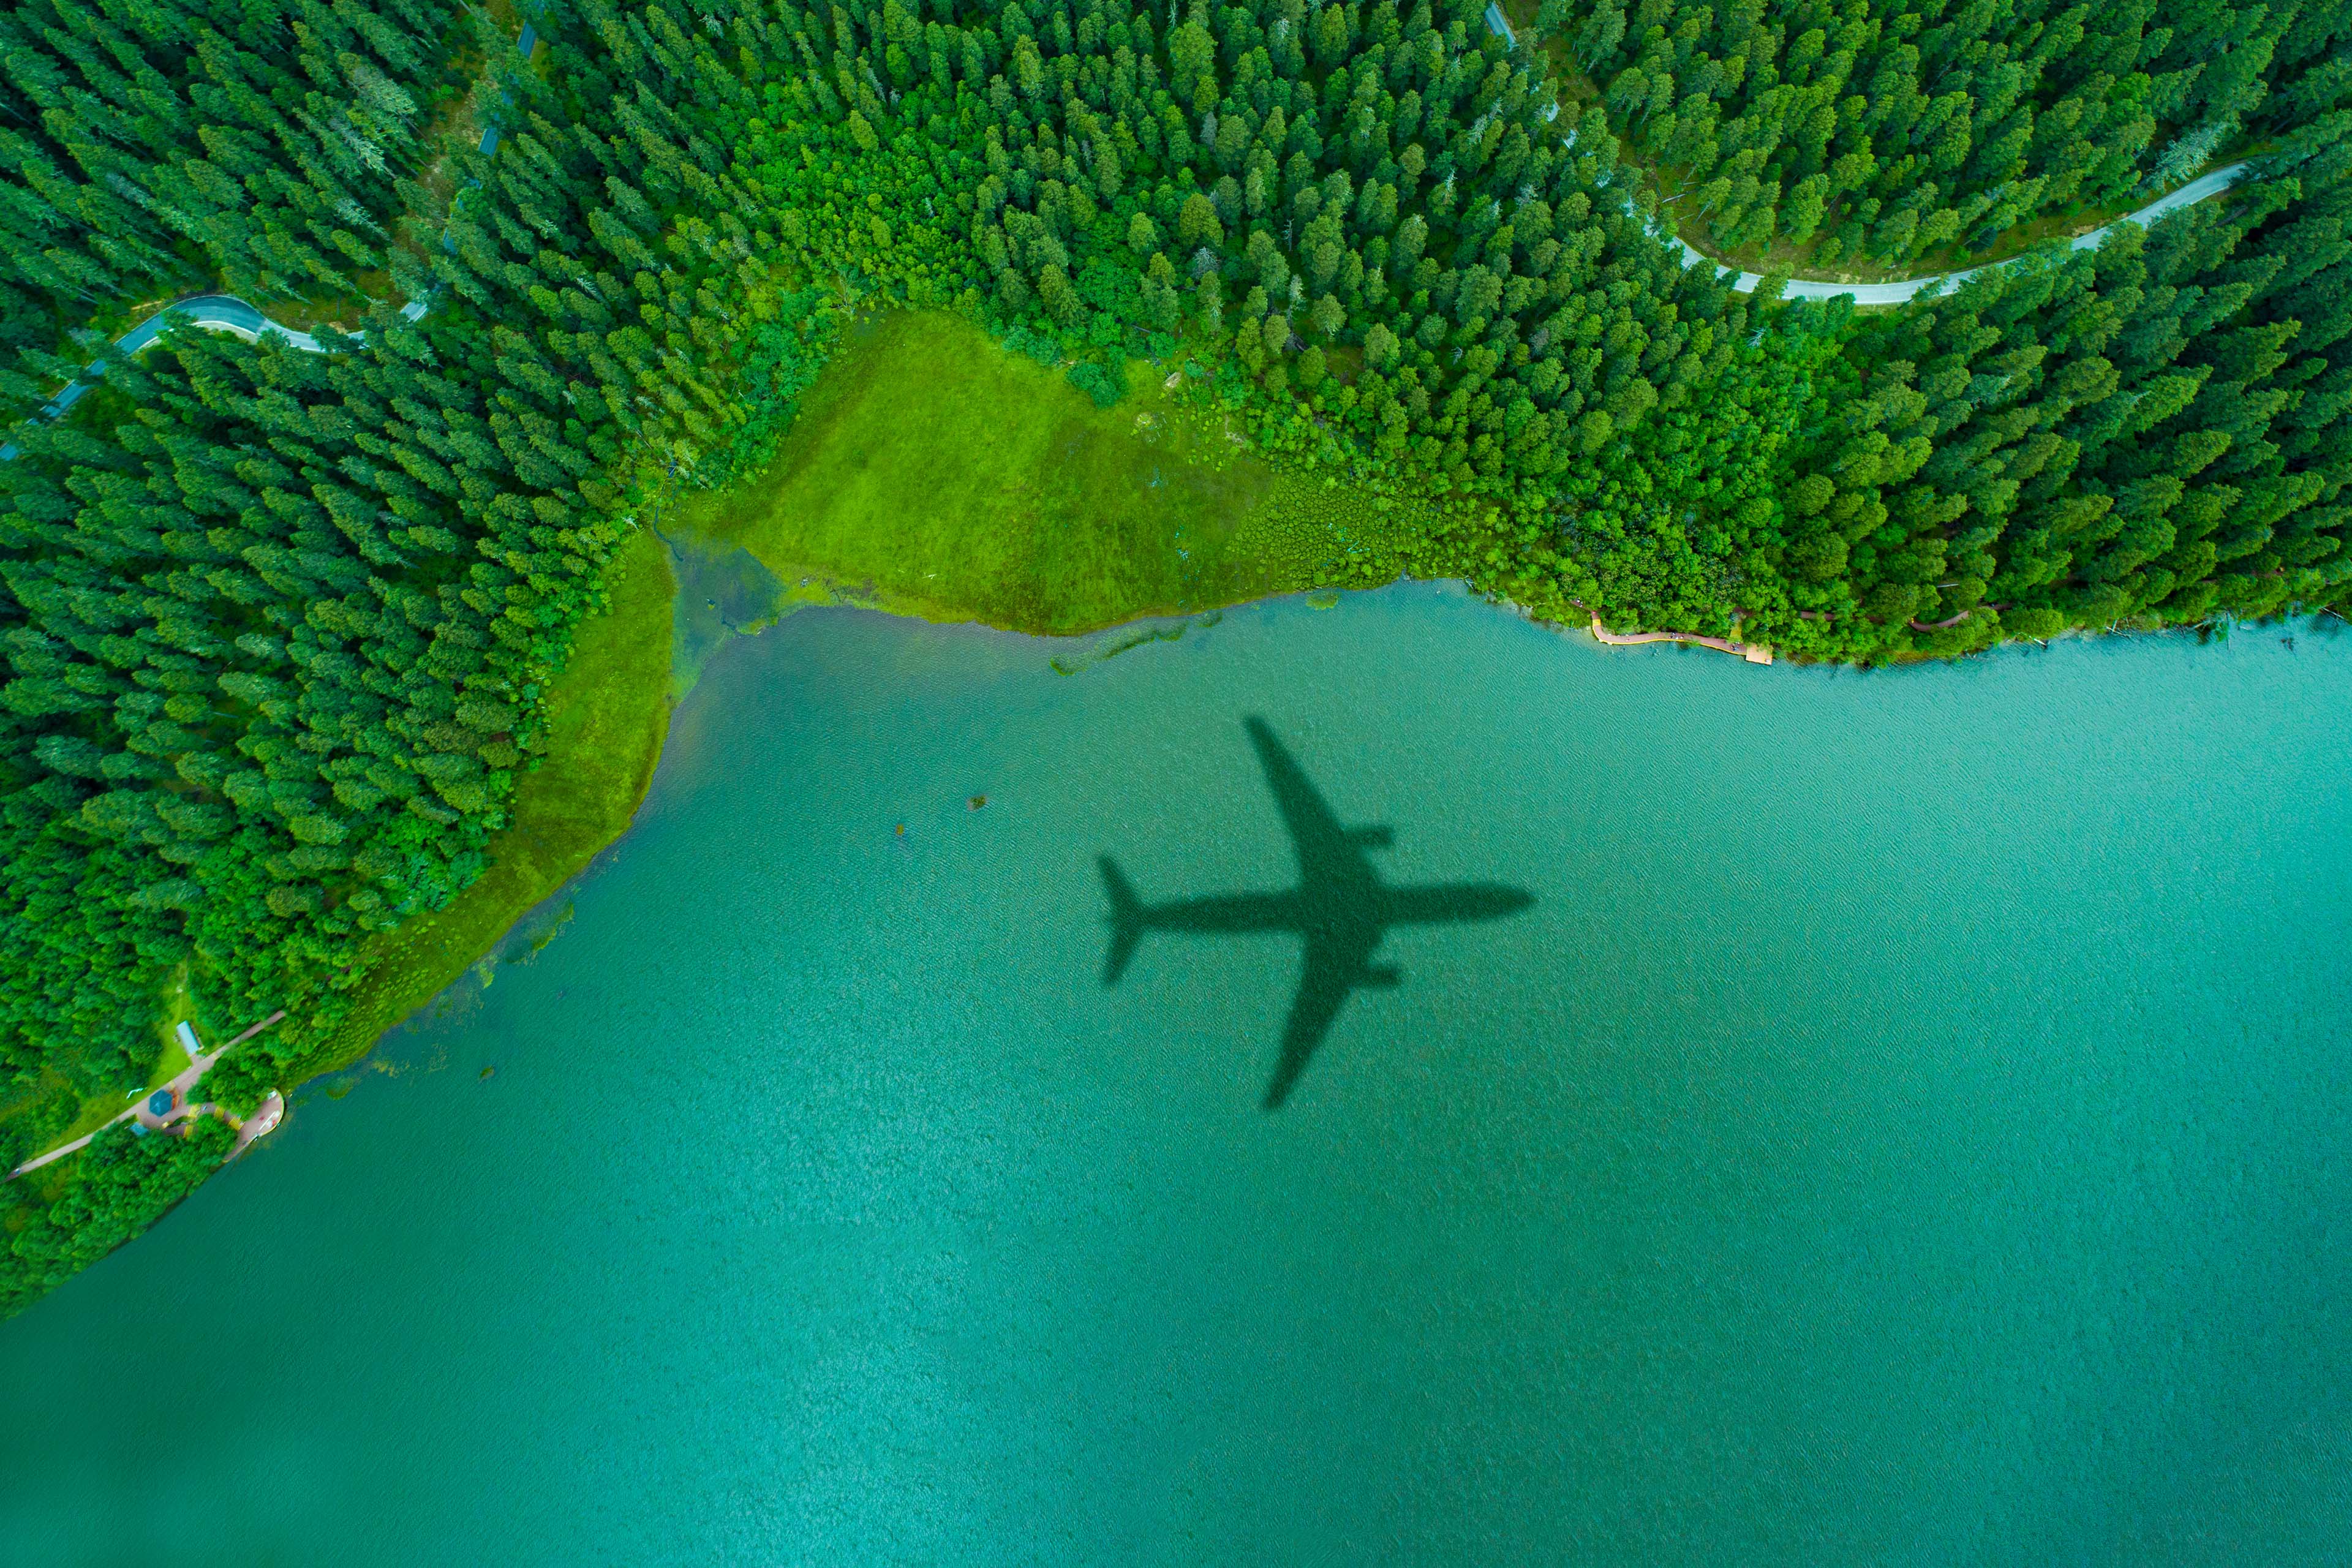 Airplane shadow over an islands forest